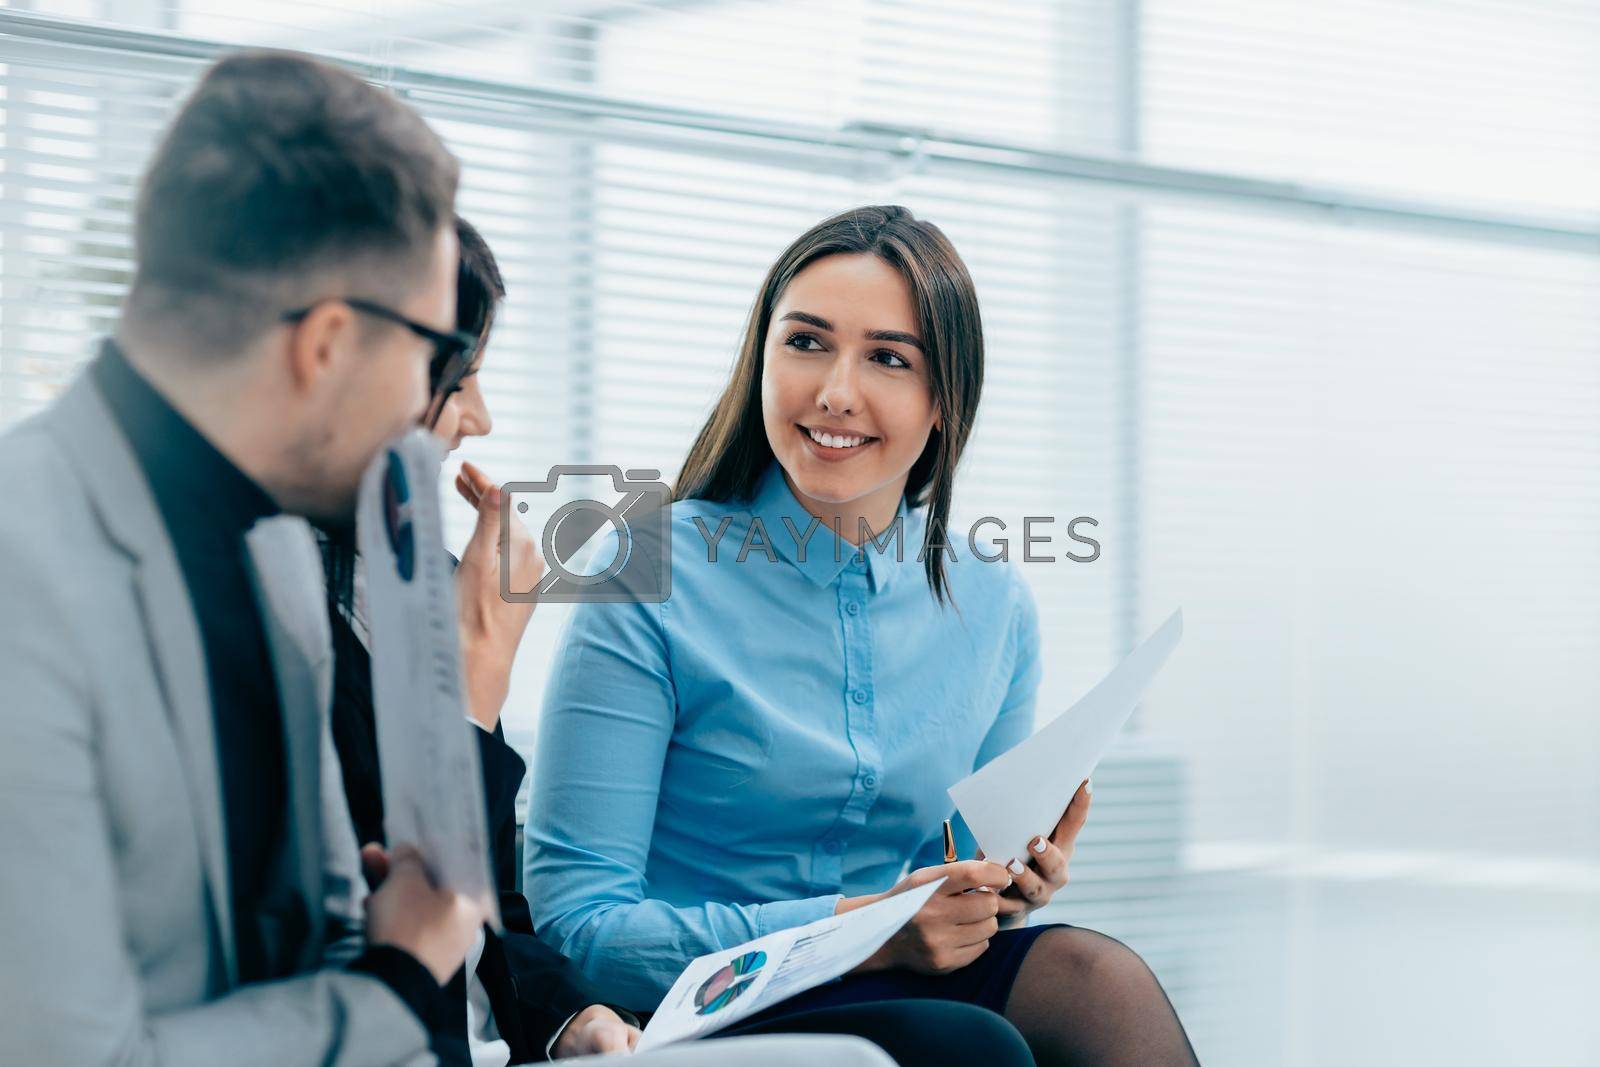 Royalty free image of group of employees discussing the terms of an employment contract by SmartPhotoLab